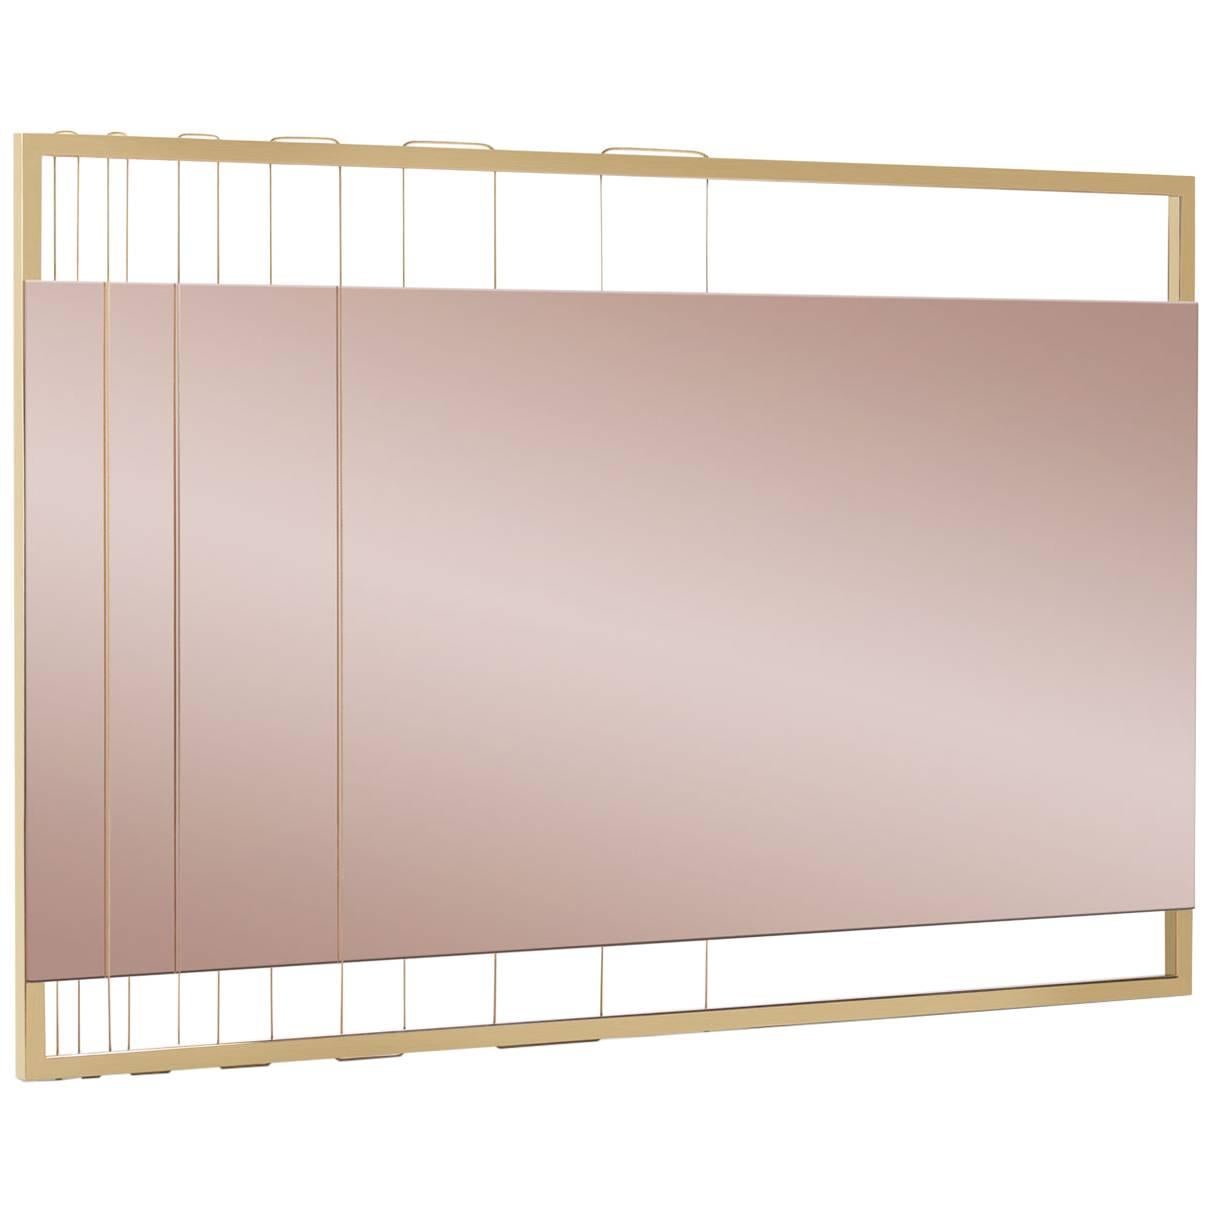 AEGIS-M mirror is made to order using gold stainless steel frame, tinted mirror and gold steel wire. The mirror can be hung vertically or horizontally. A modern contemporary design using only the finest materials and manufacturing methods. Every